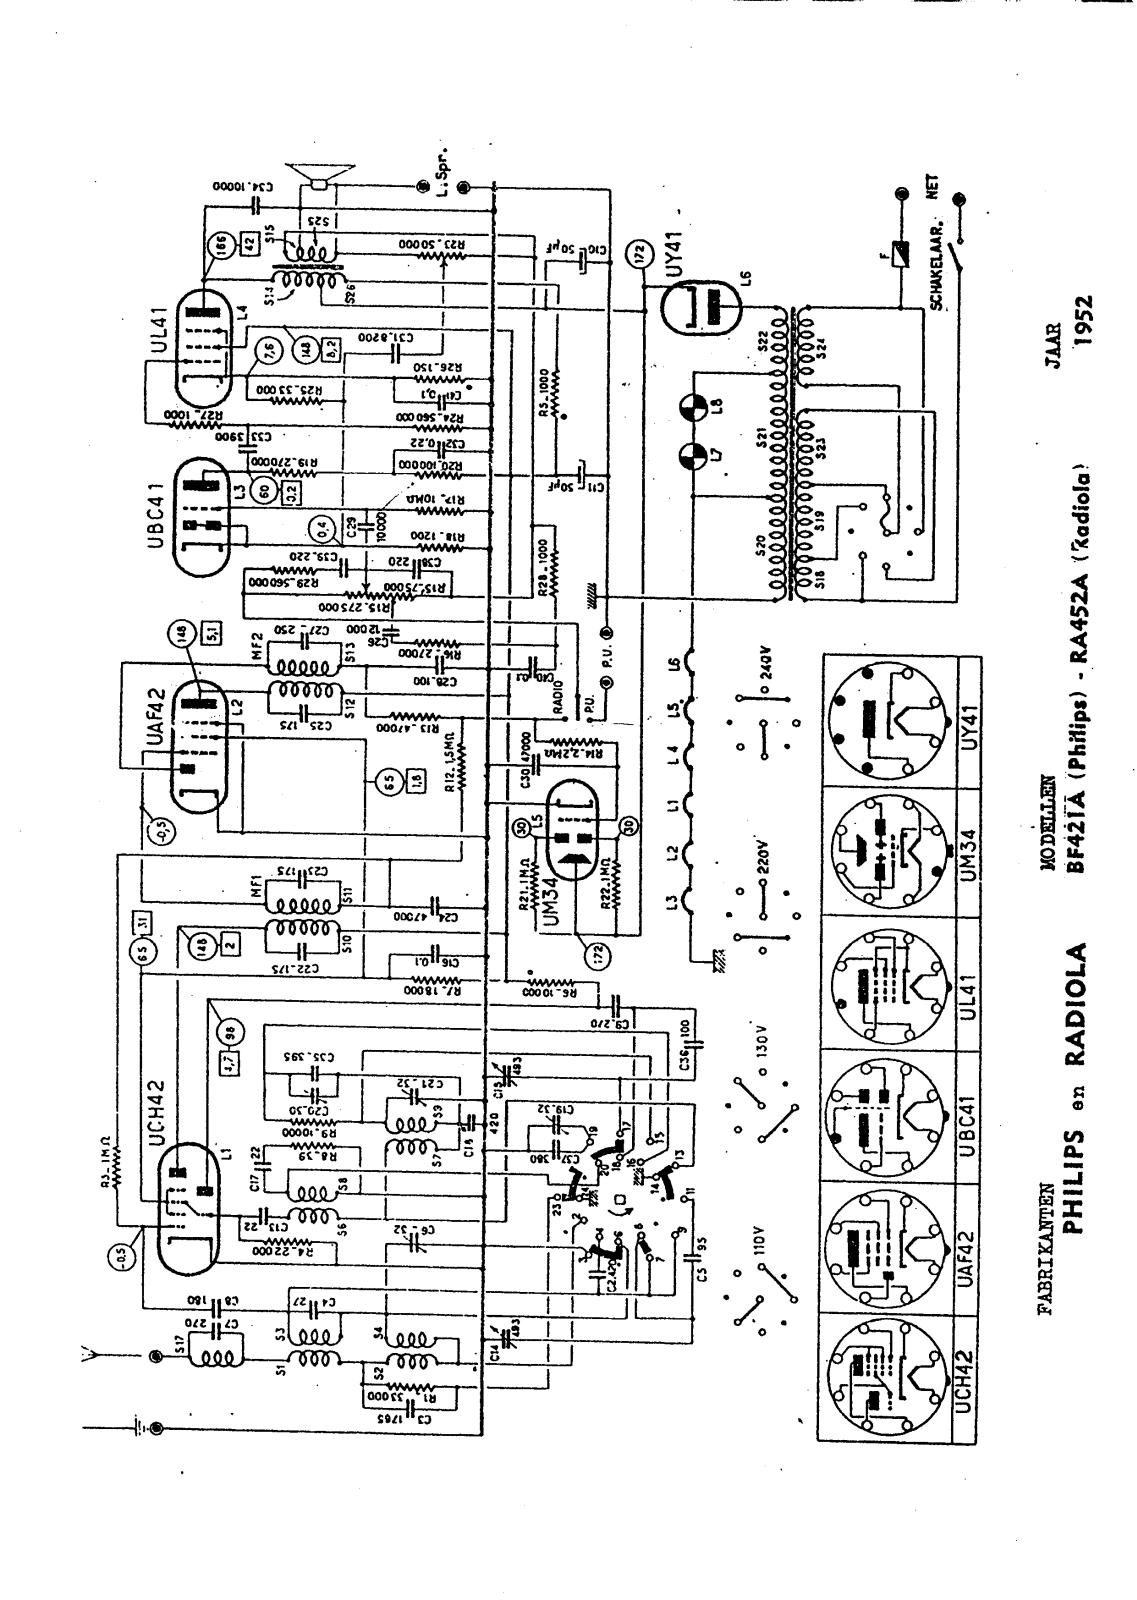 Philips RA-452A, BF-421-A Schematic